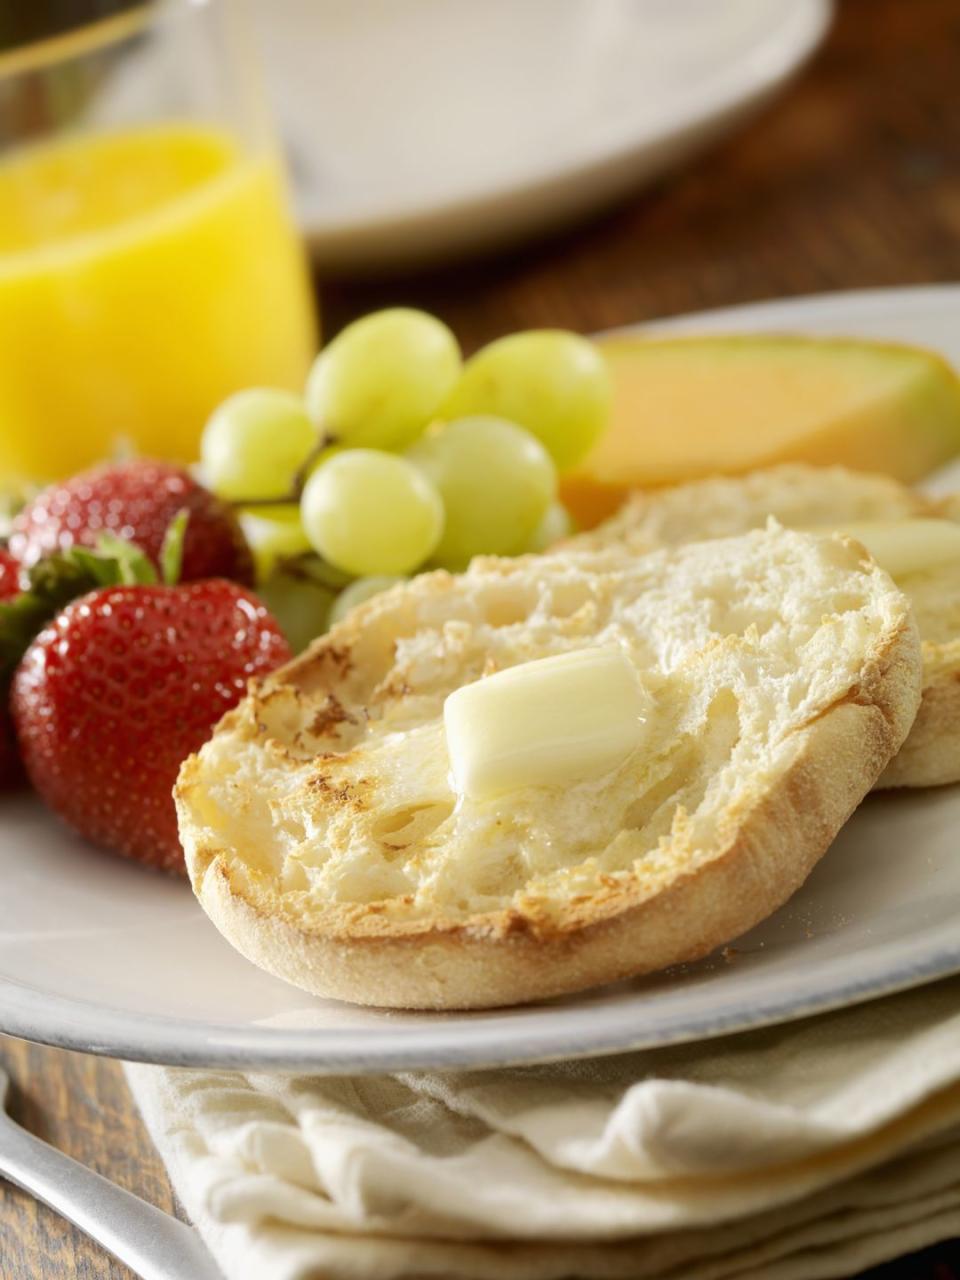 english muffins with melted butter photographed on hasselblad h3d2 39mb camera